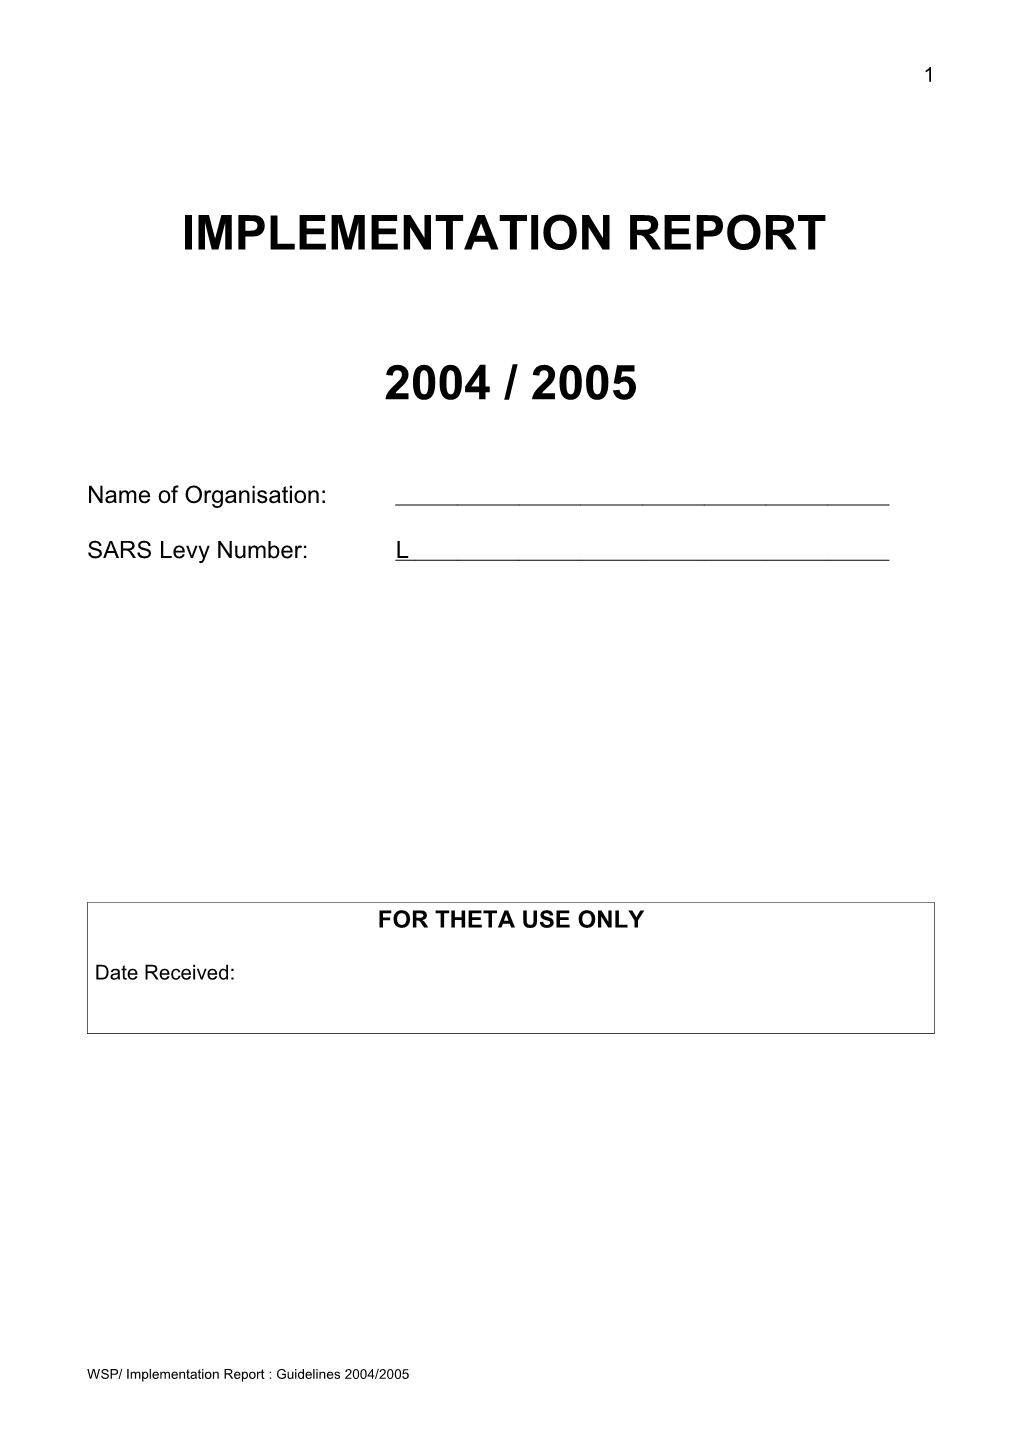 Implementation Report